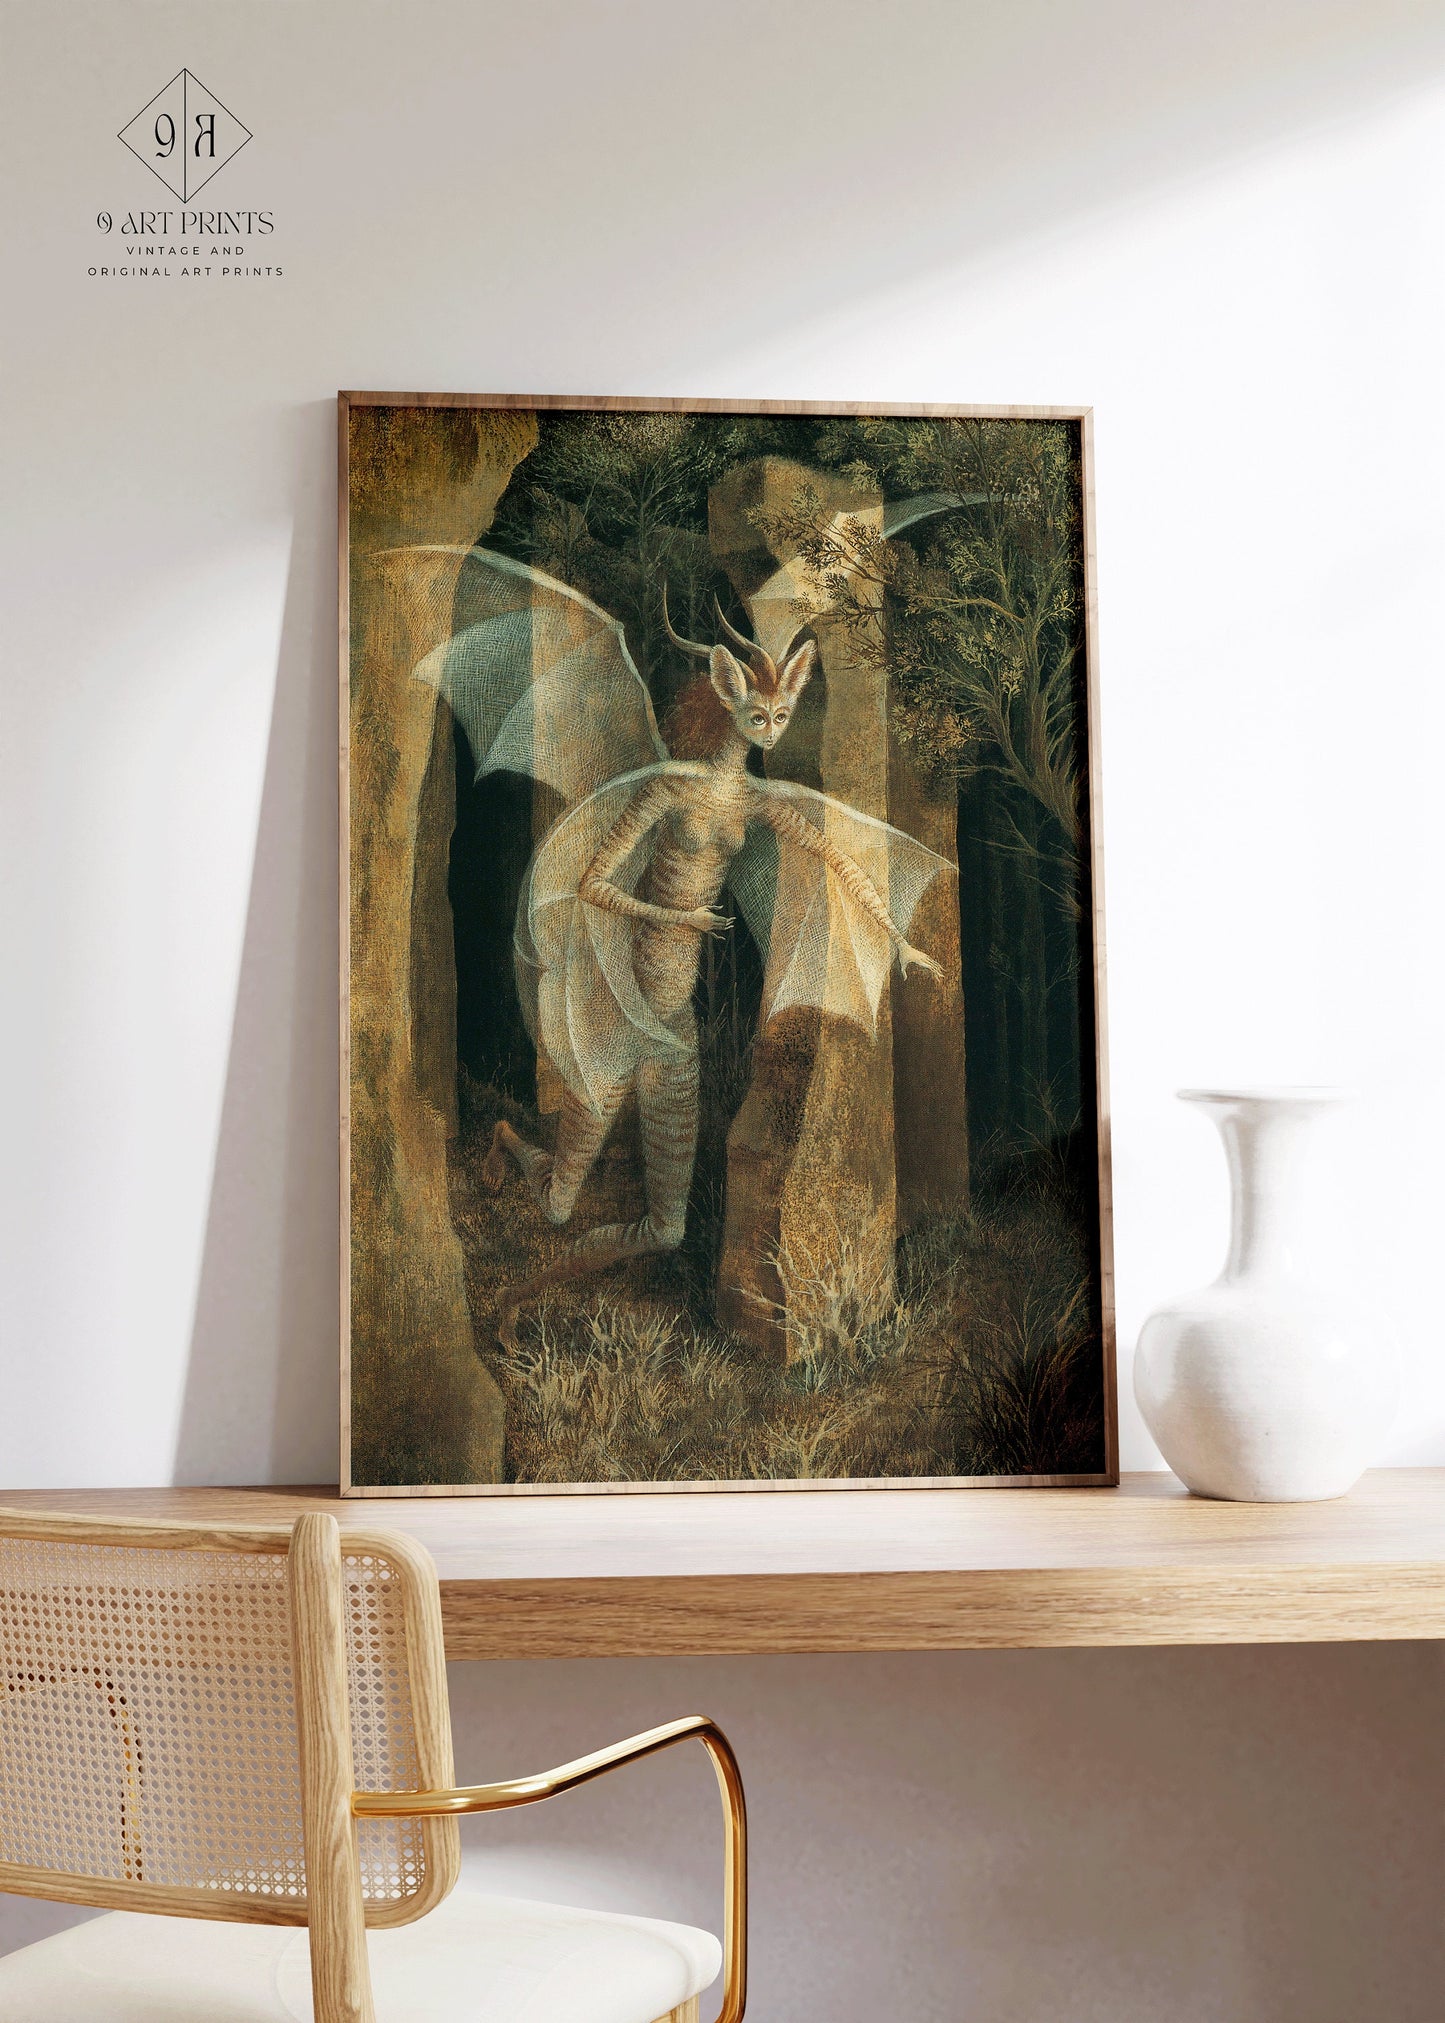 Remedios Varo The Call Fine Surreal Art Famous Mexican Iconic Painting Vintage Ready to hang Framed Home Office Decor Print Gift Idea